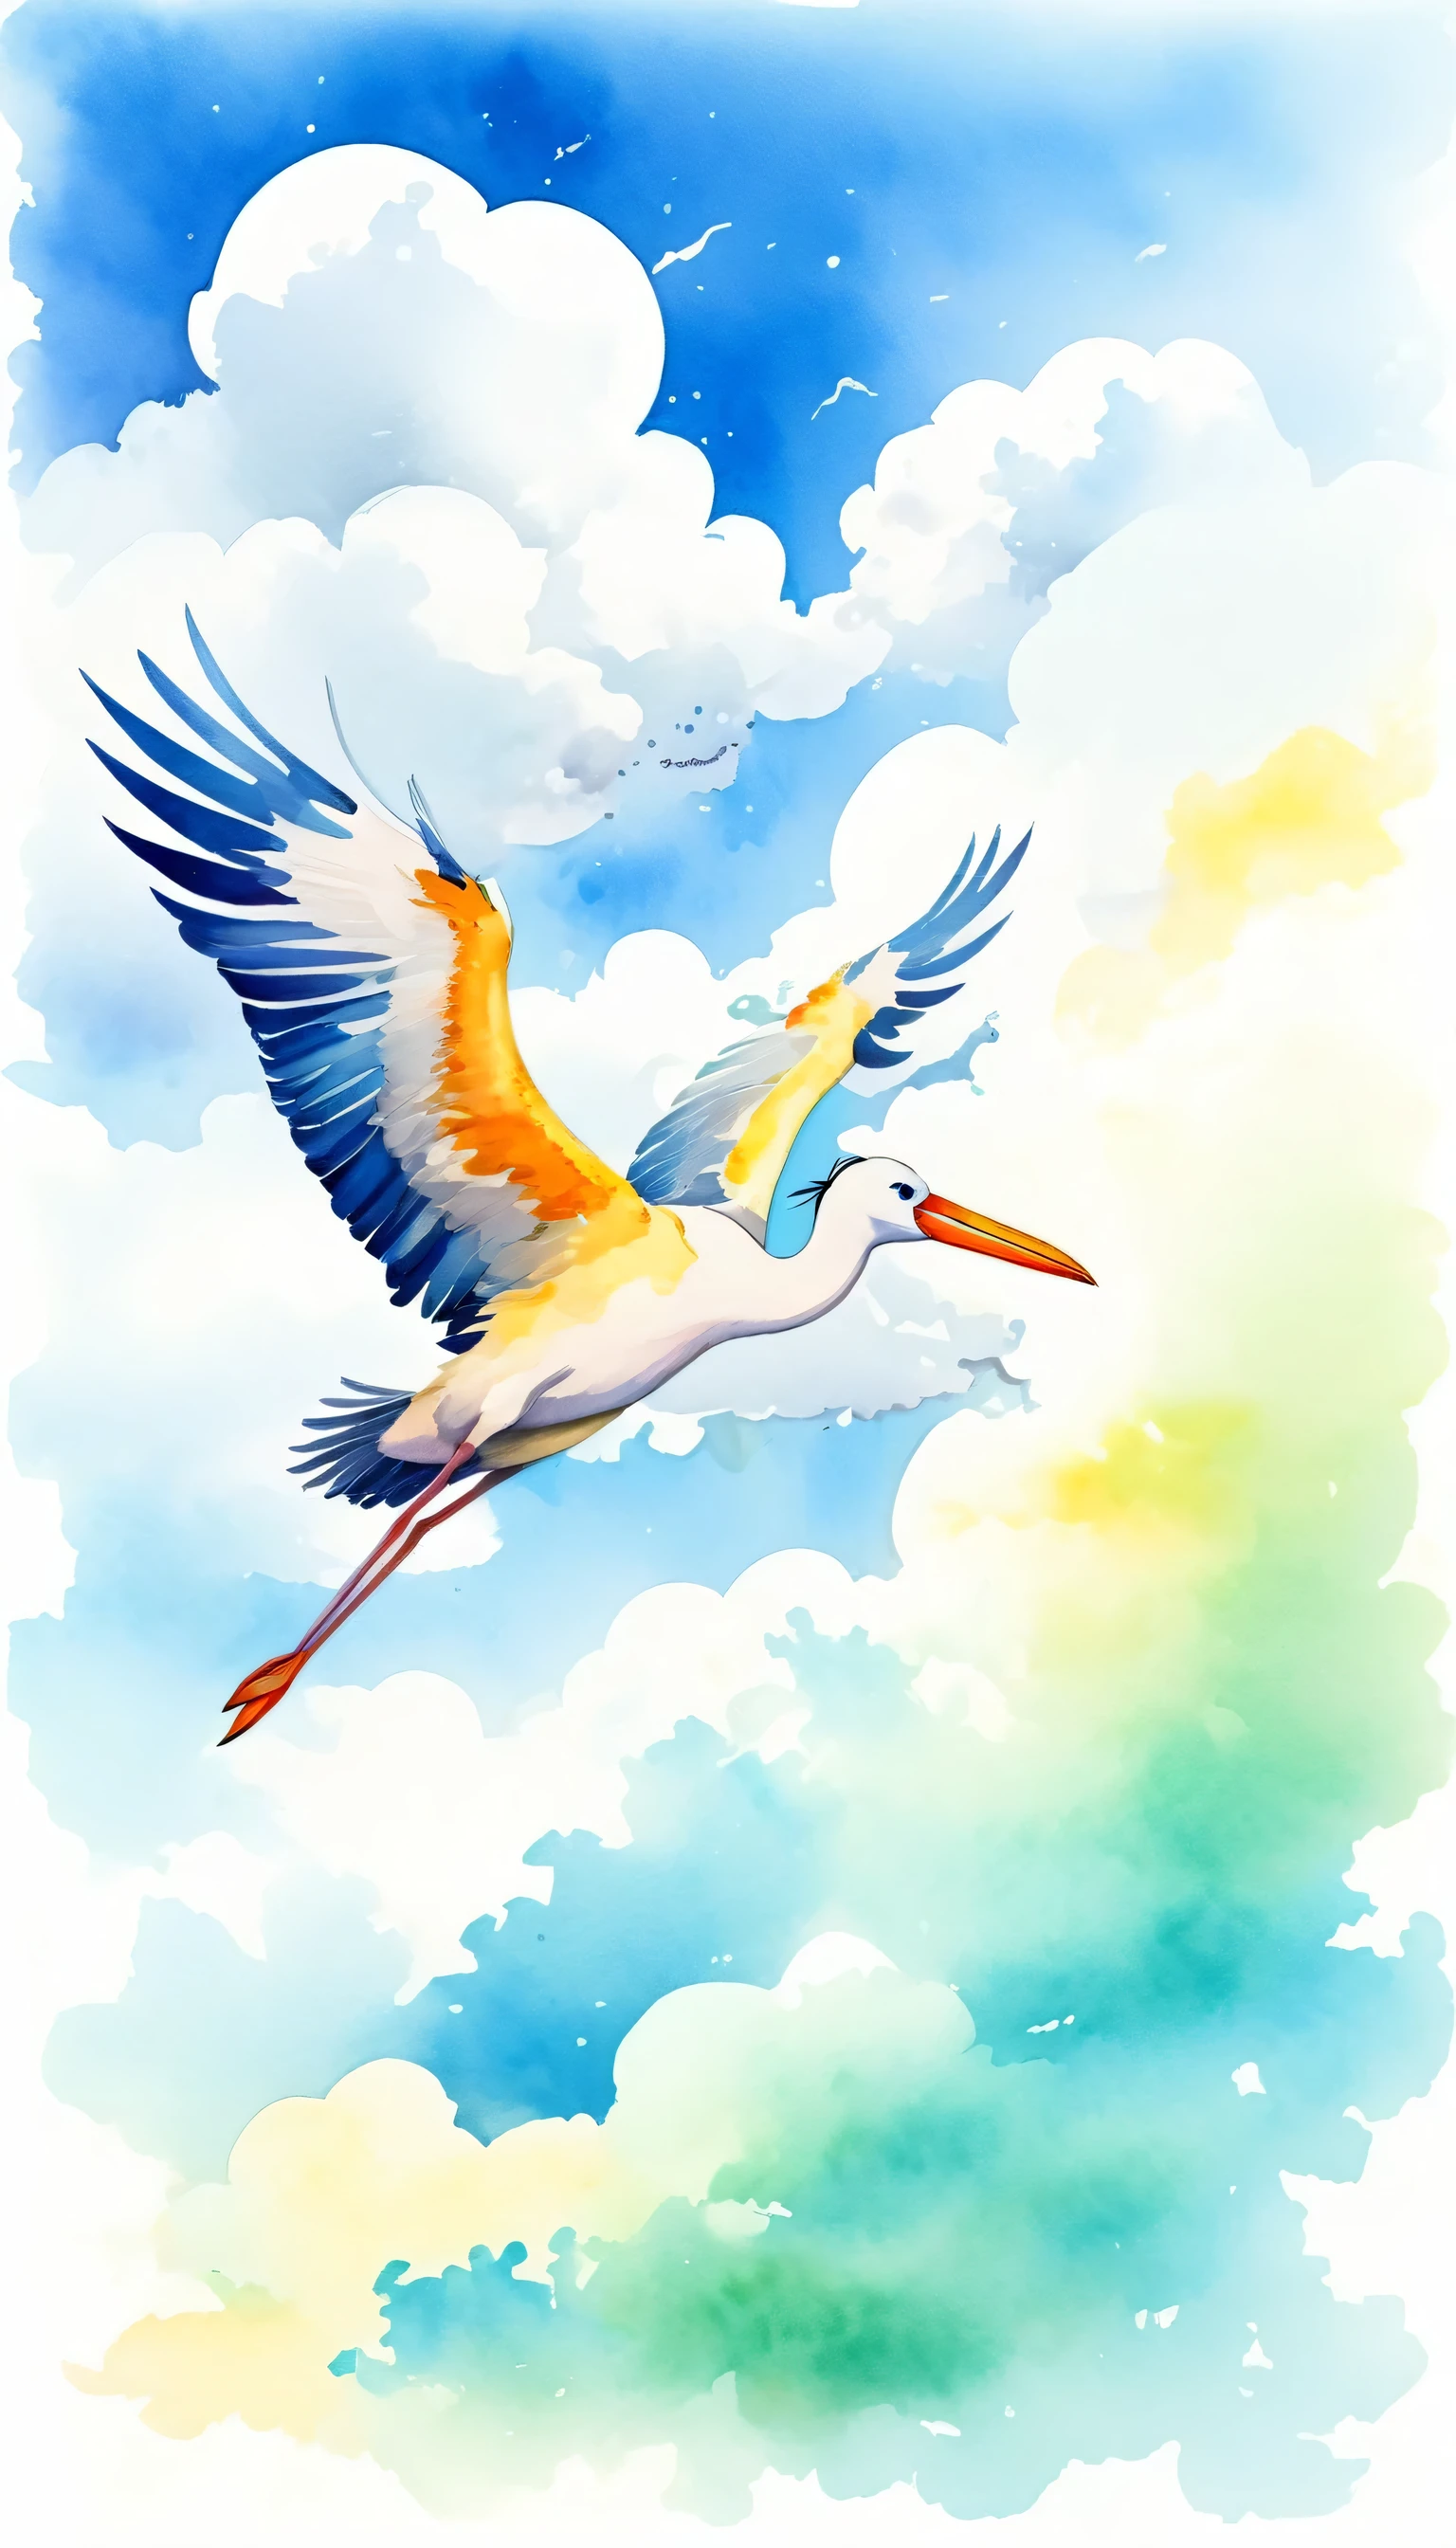 stork flying in the sky, stork carrying a baby, delivering a baby in its beak, clouds, sky, animal_focus, cloudy_sky, funny, cartoon, modern art, painting, drawing, watercolor, psychedelic colors